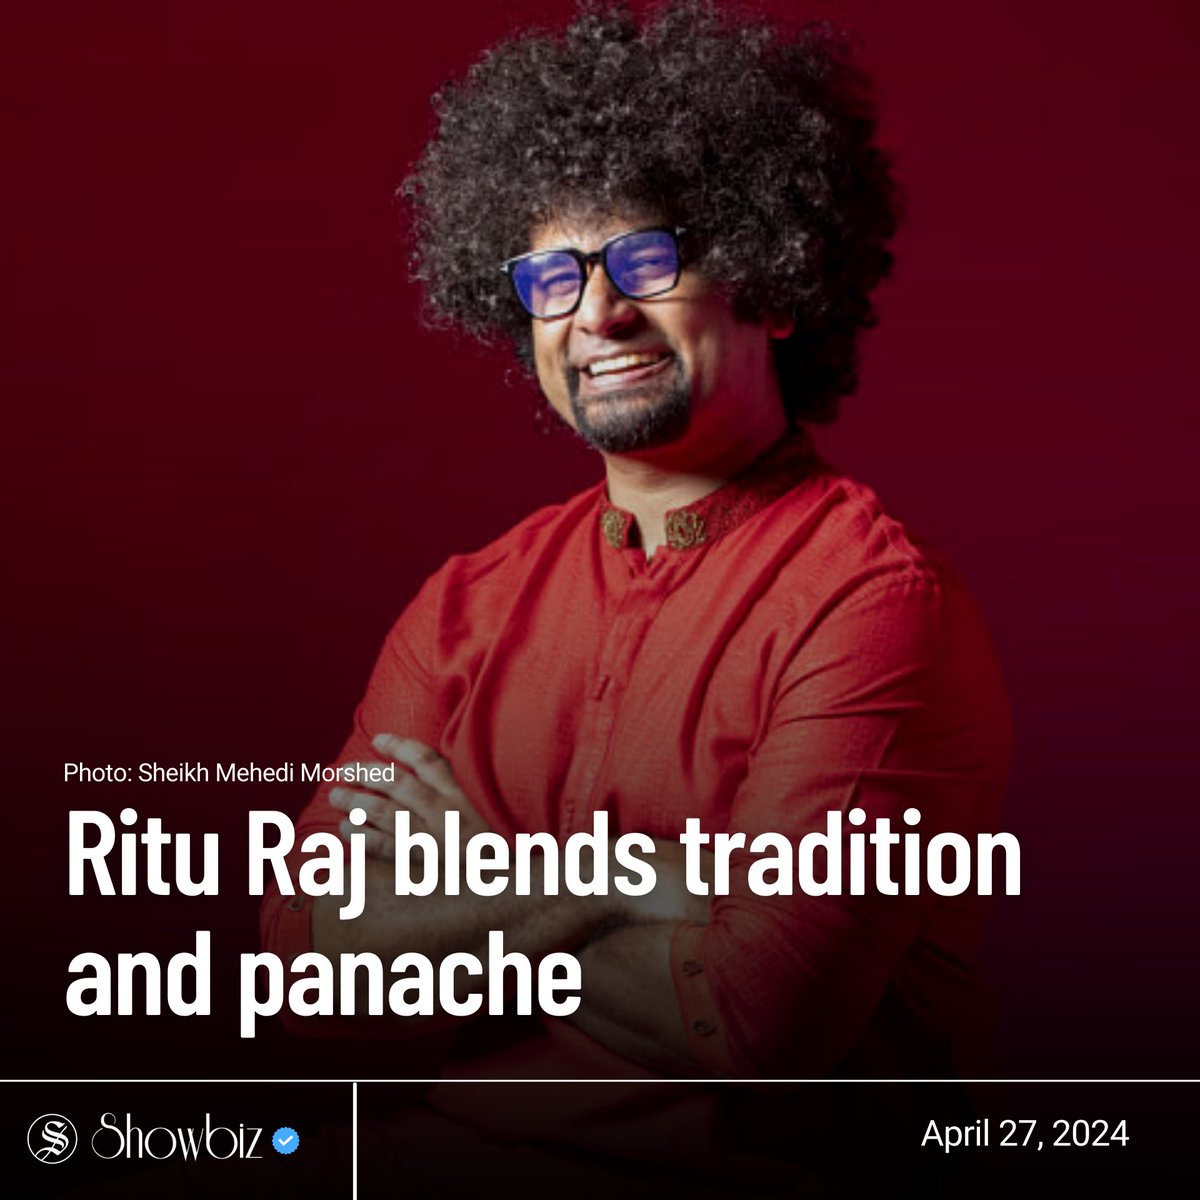 Read more: tinyurl.com/ubc6sh2k From his early days in 'Close Up-1' to his enthralling performance in Coke Studio Bangla's 'Bulbuli', Ritu Raj's melodious voice has left a lasting impression on audiences. #Bangladesh #EntertainmentNews #NewsUpdates